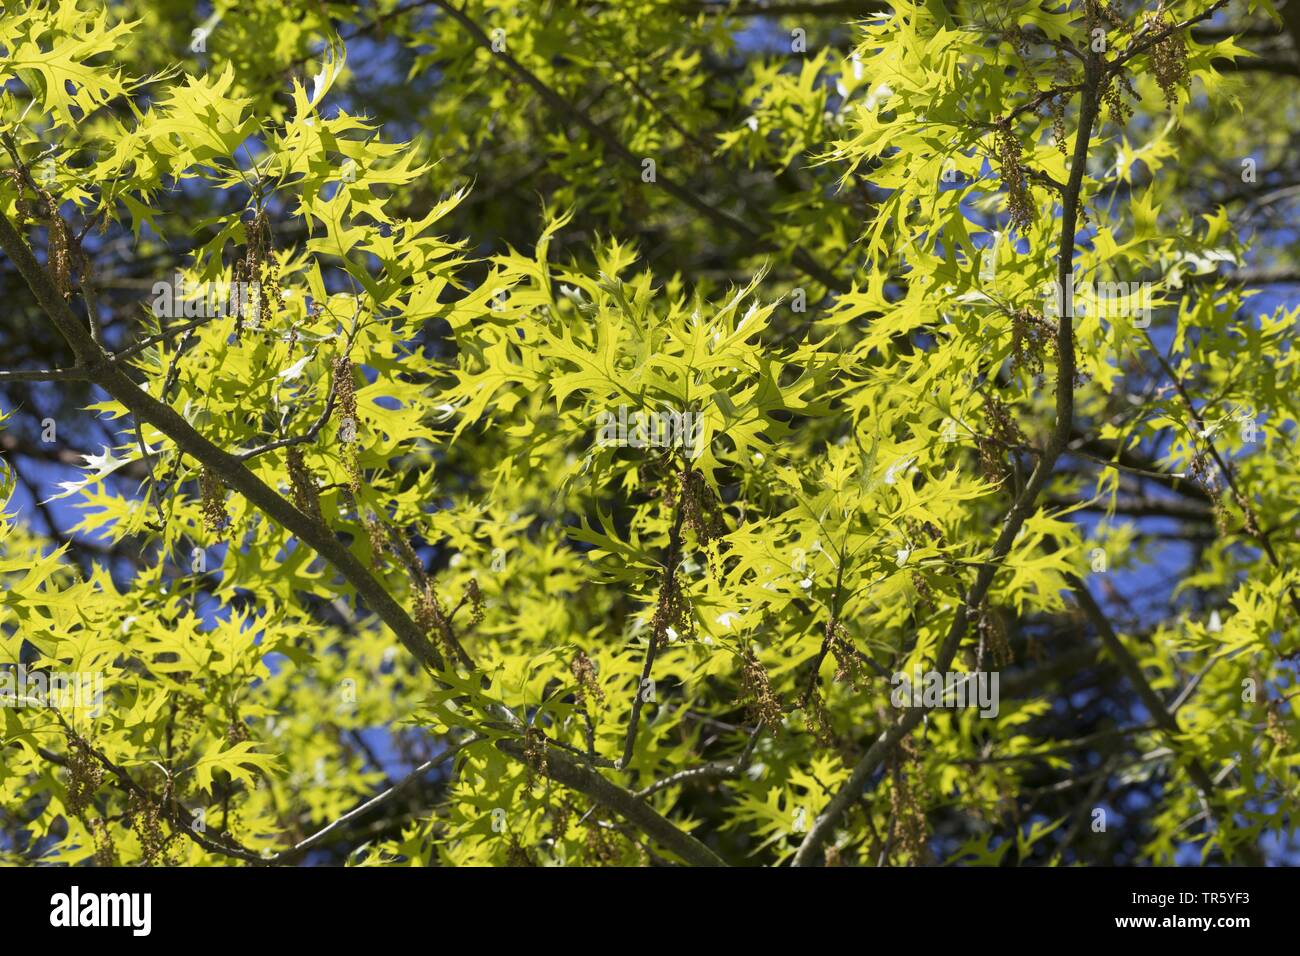 Pin oak, Swamp Spanish oak (Quercus palustris), blooming branch with fresh leaves Stock Photo